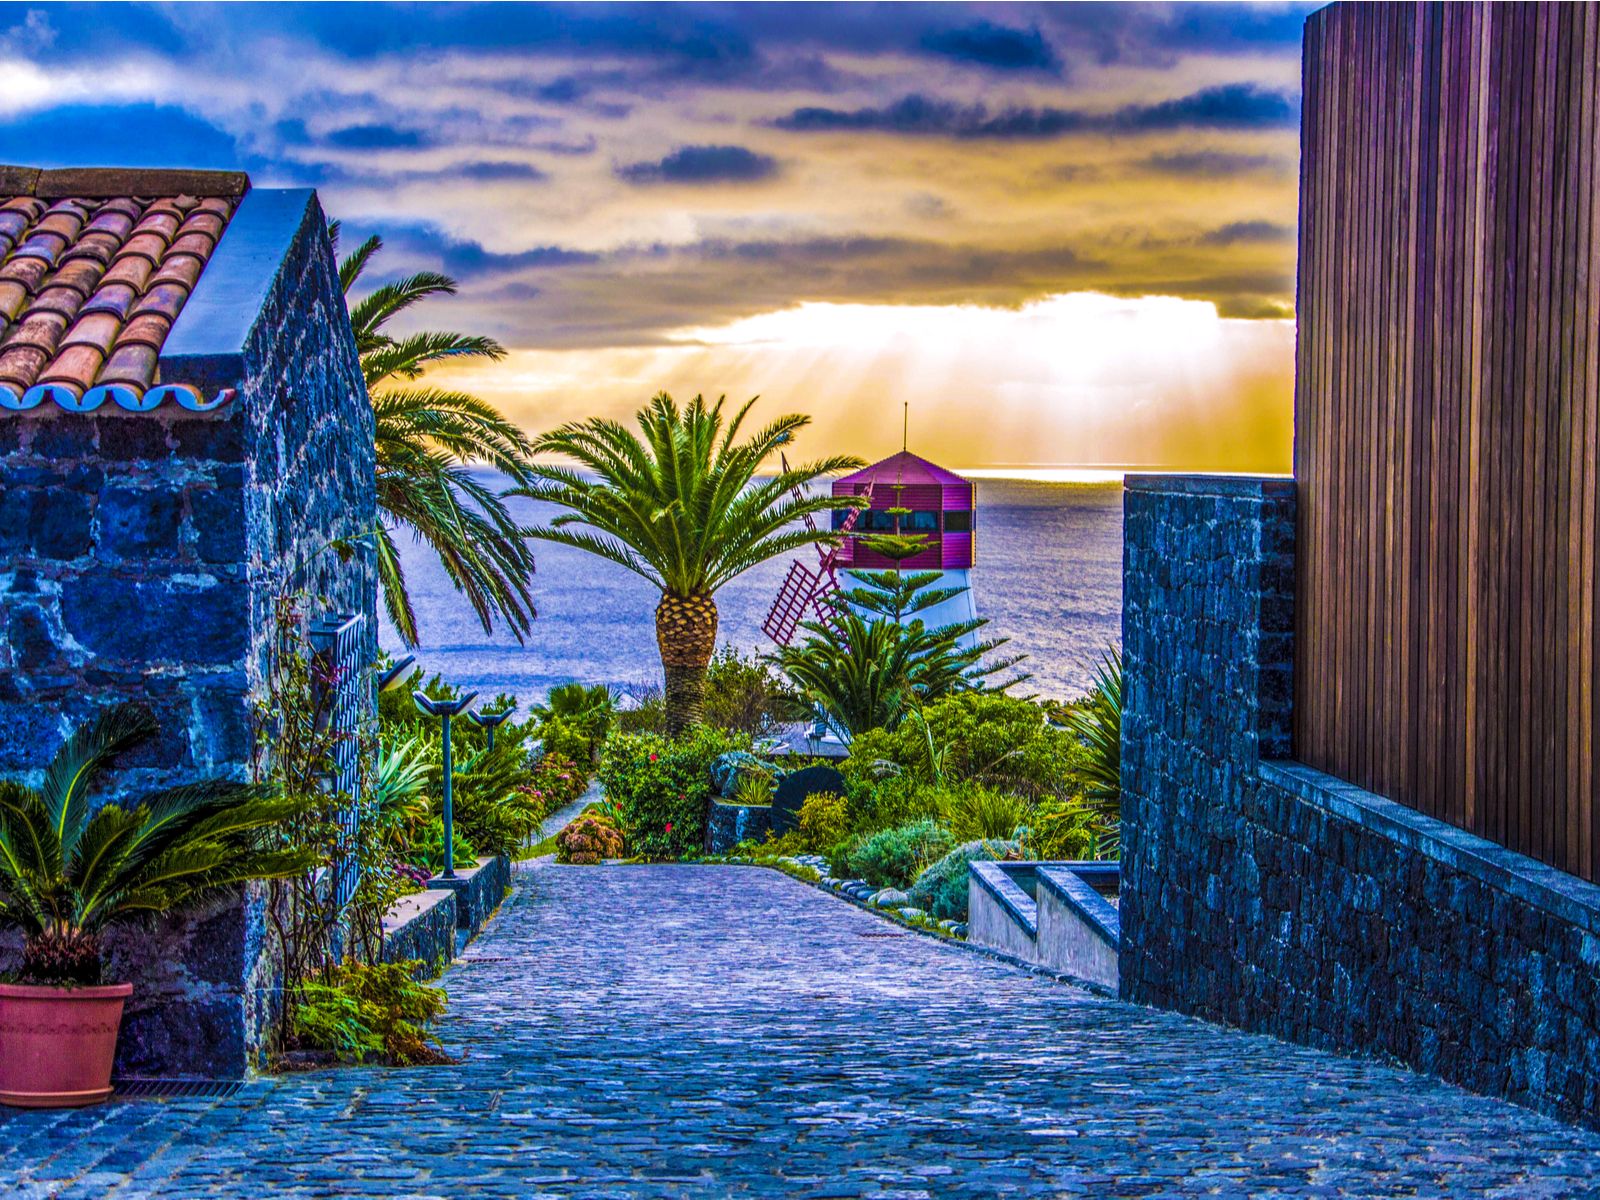 Brick street view of Sao Miguel, one of the best island vacations